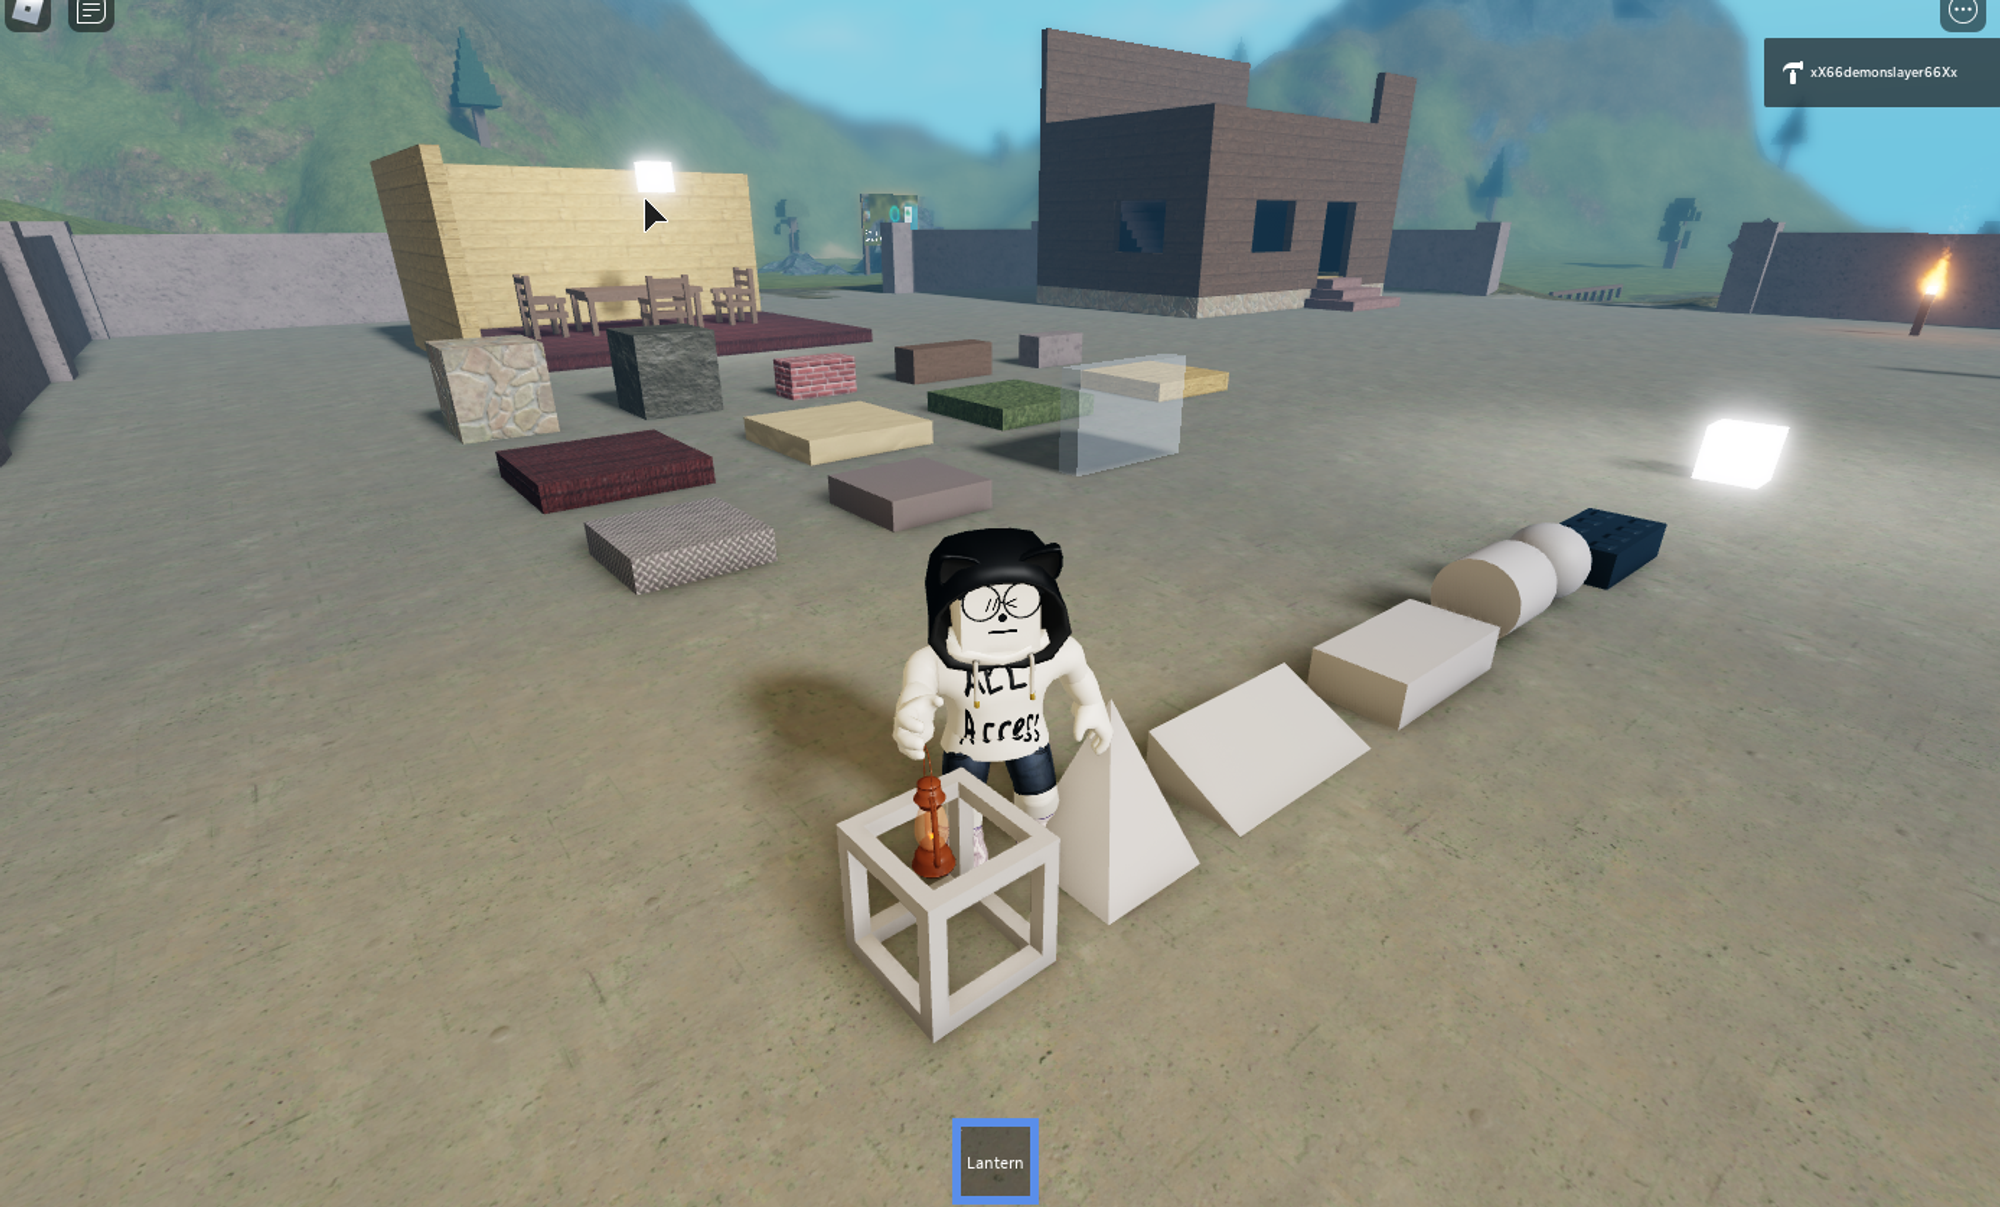 My avatar holding a lantern in a material-test default world.